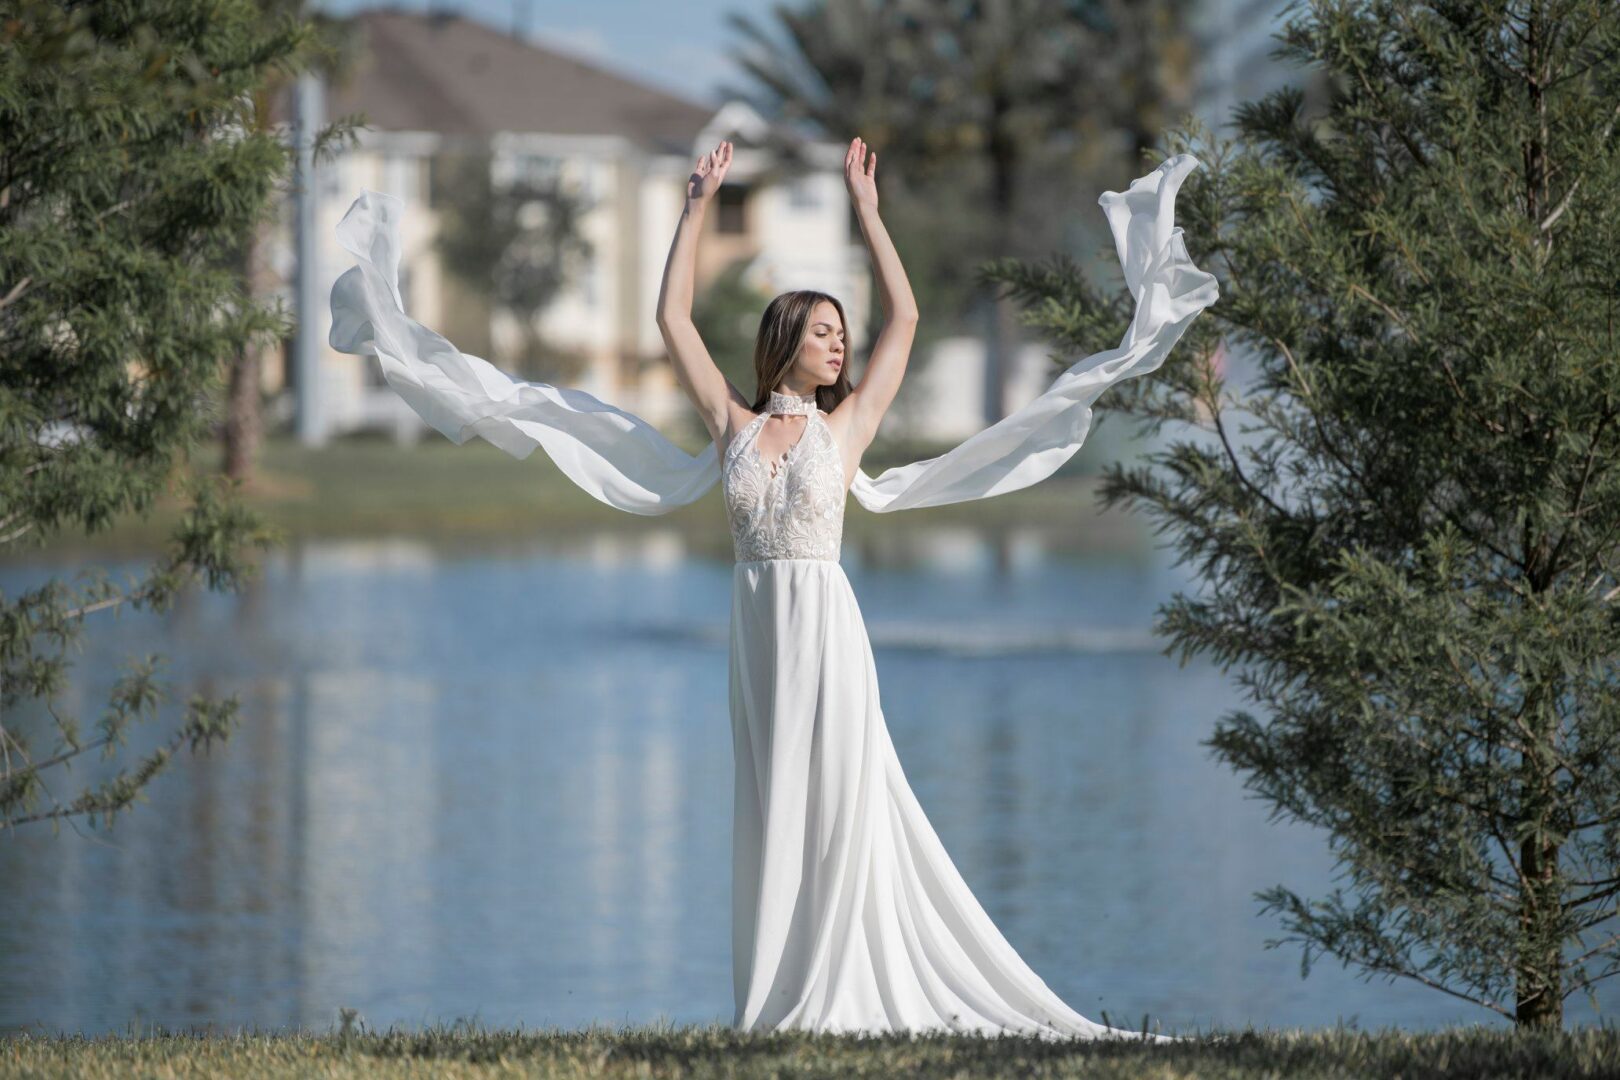 A bride in a Halter Top Chiffon Wedding Dress standing with her arms out in front of a lake.